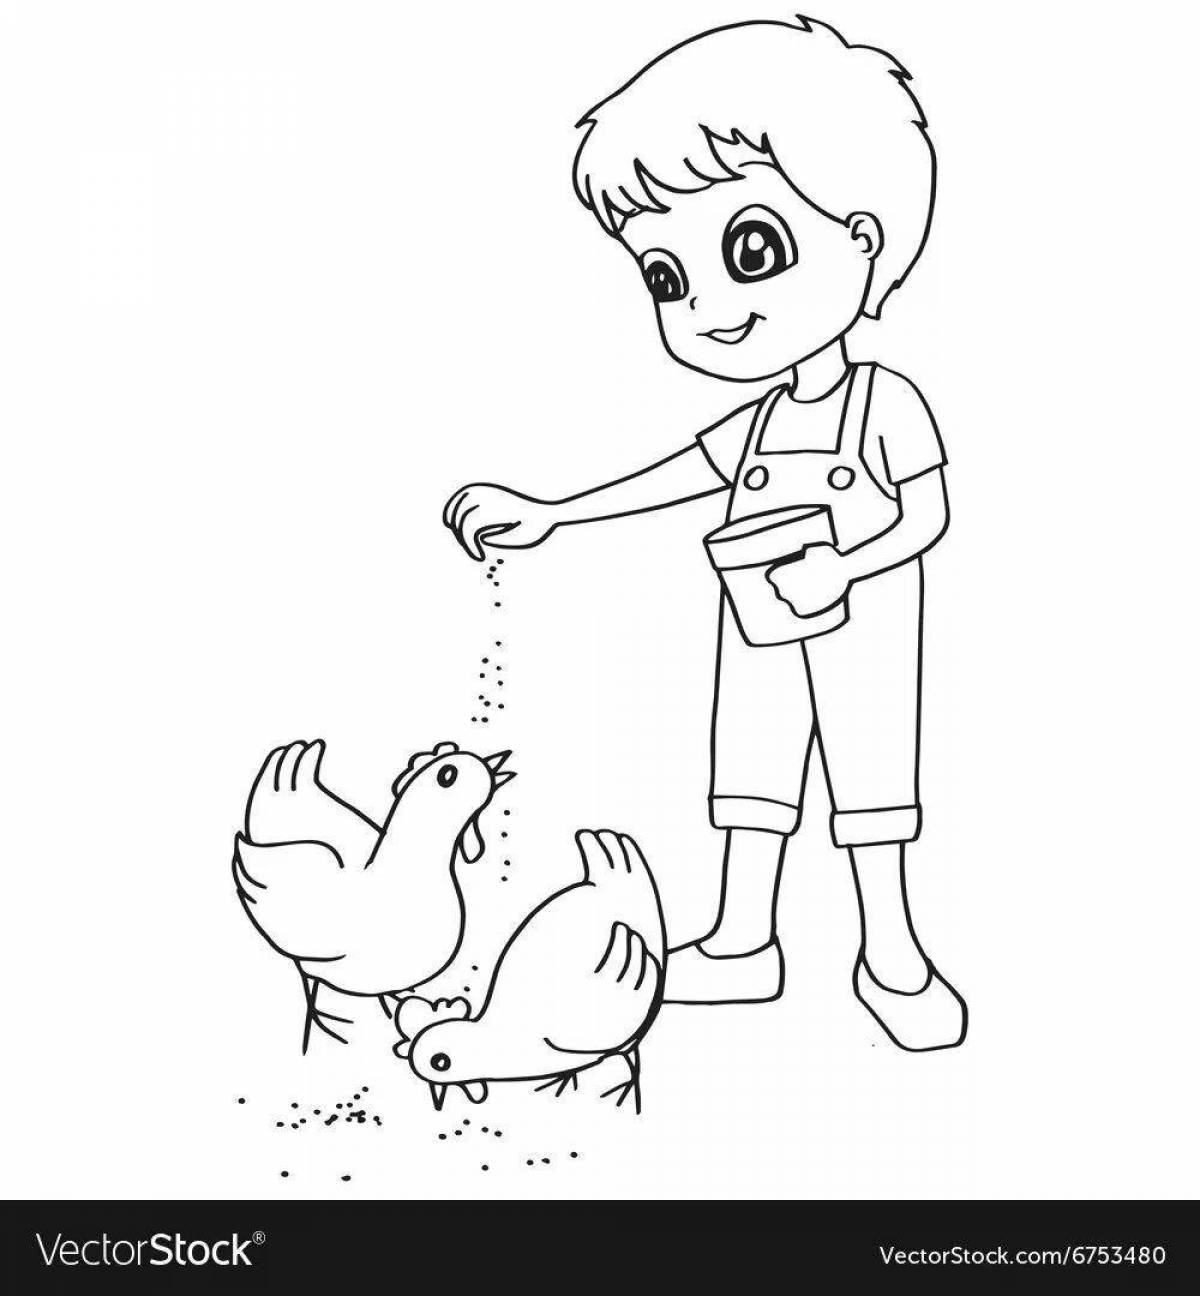 Tiny squeezing duck coloring book